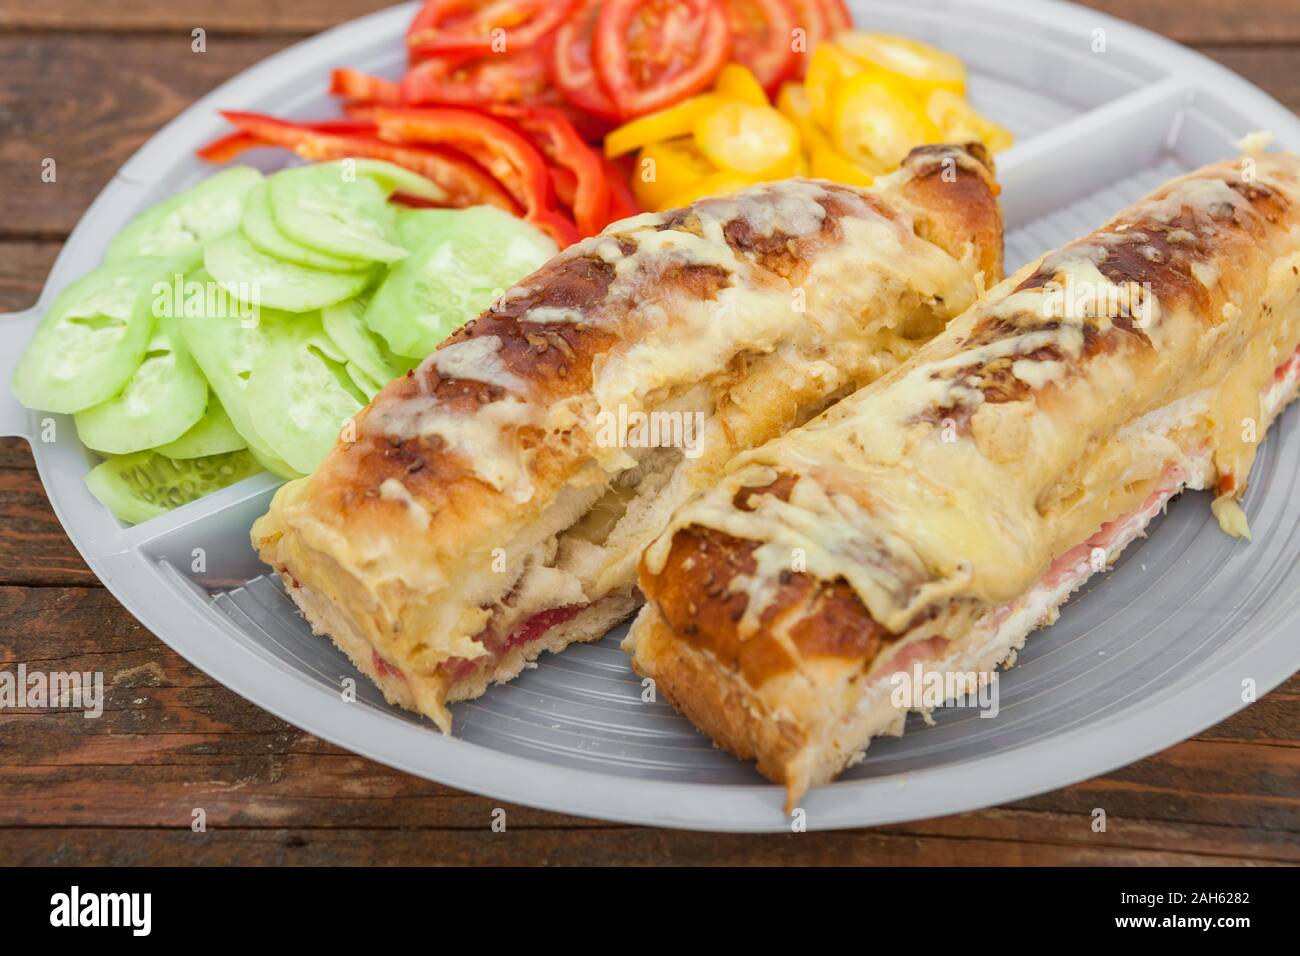 Tasty sandwich with ham, melted cheese and vegetables Stock Photo